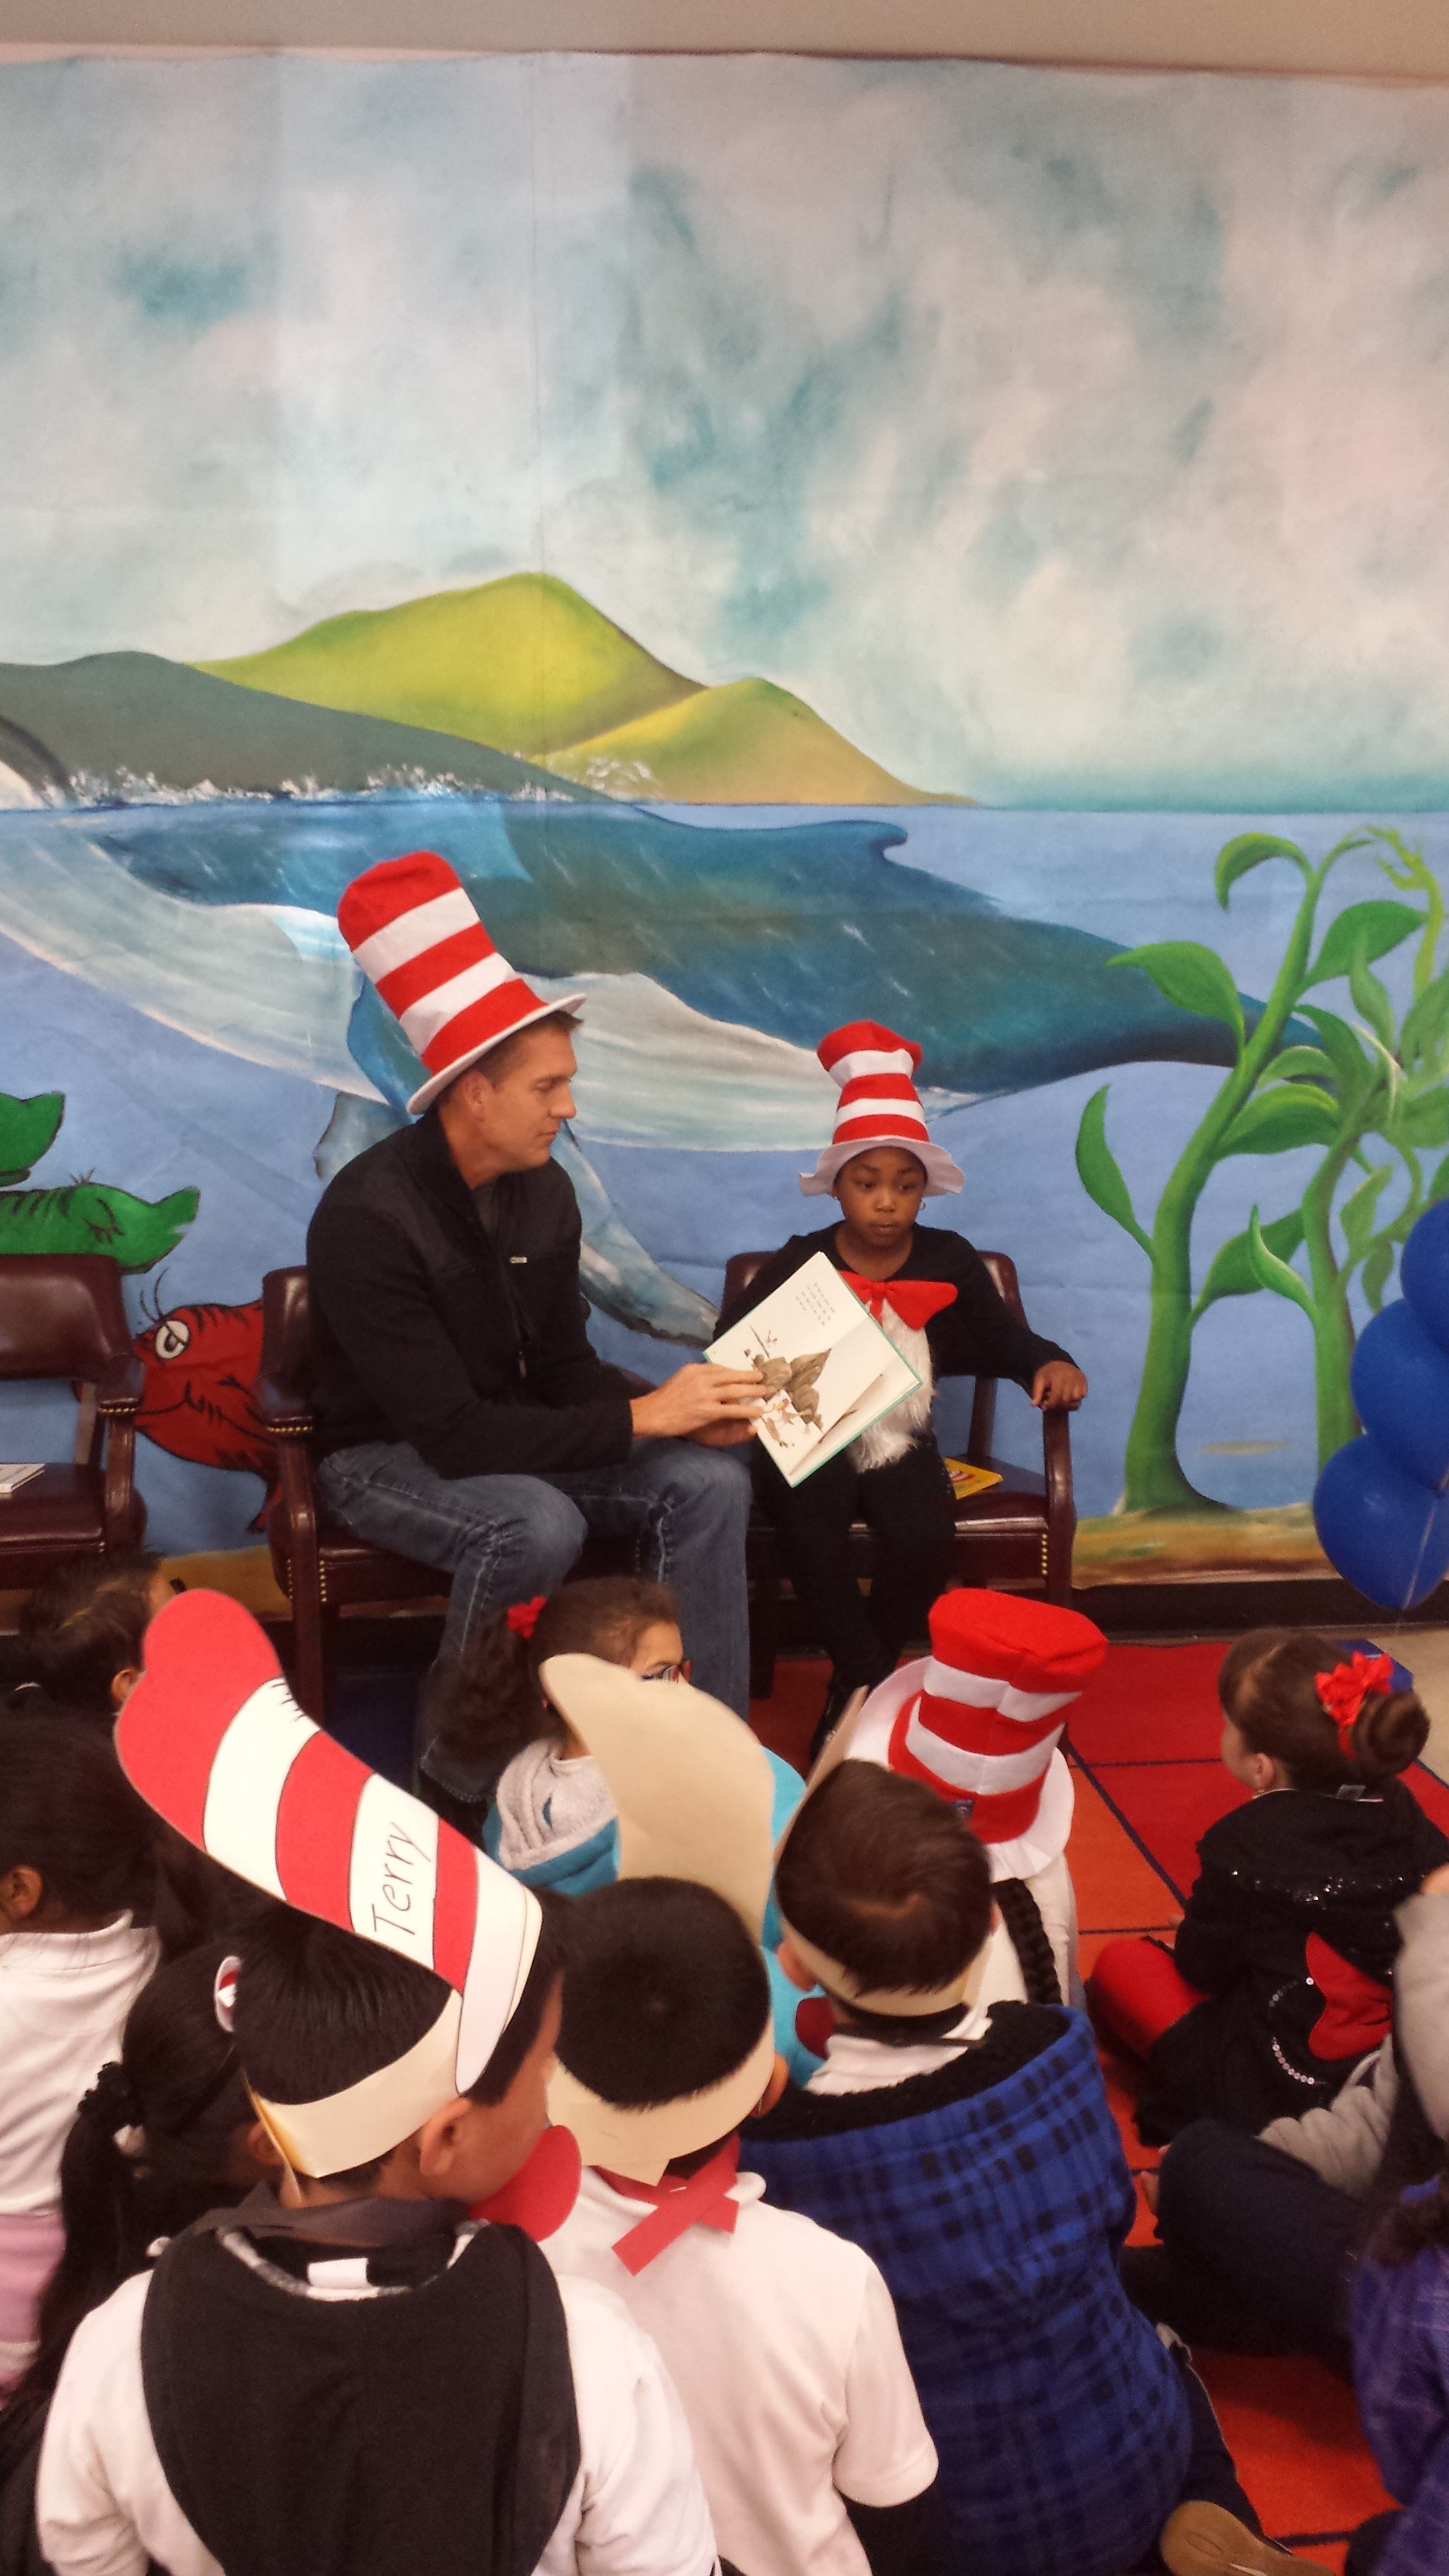 Jessica Mikayla Adams partnered with Regan Burns from Dog With The Blog for Read Across America at CUSD